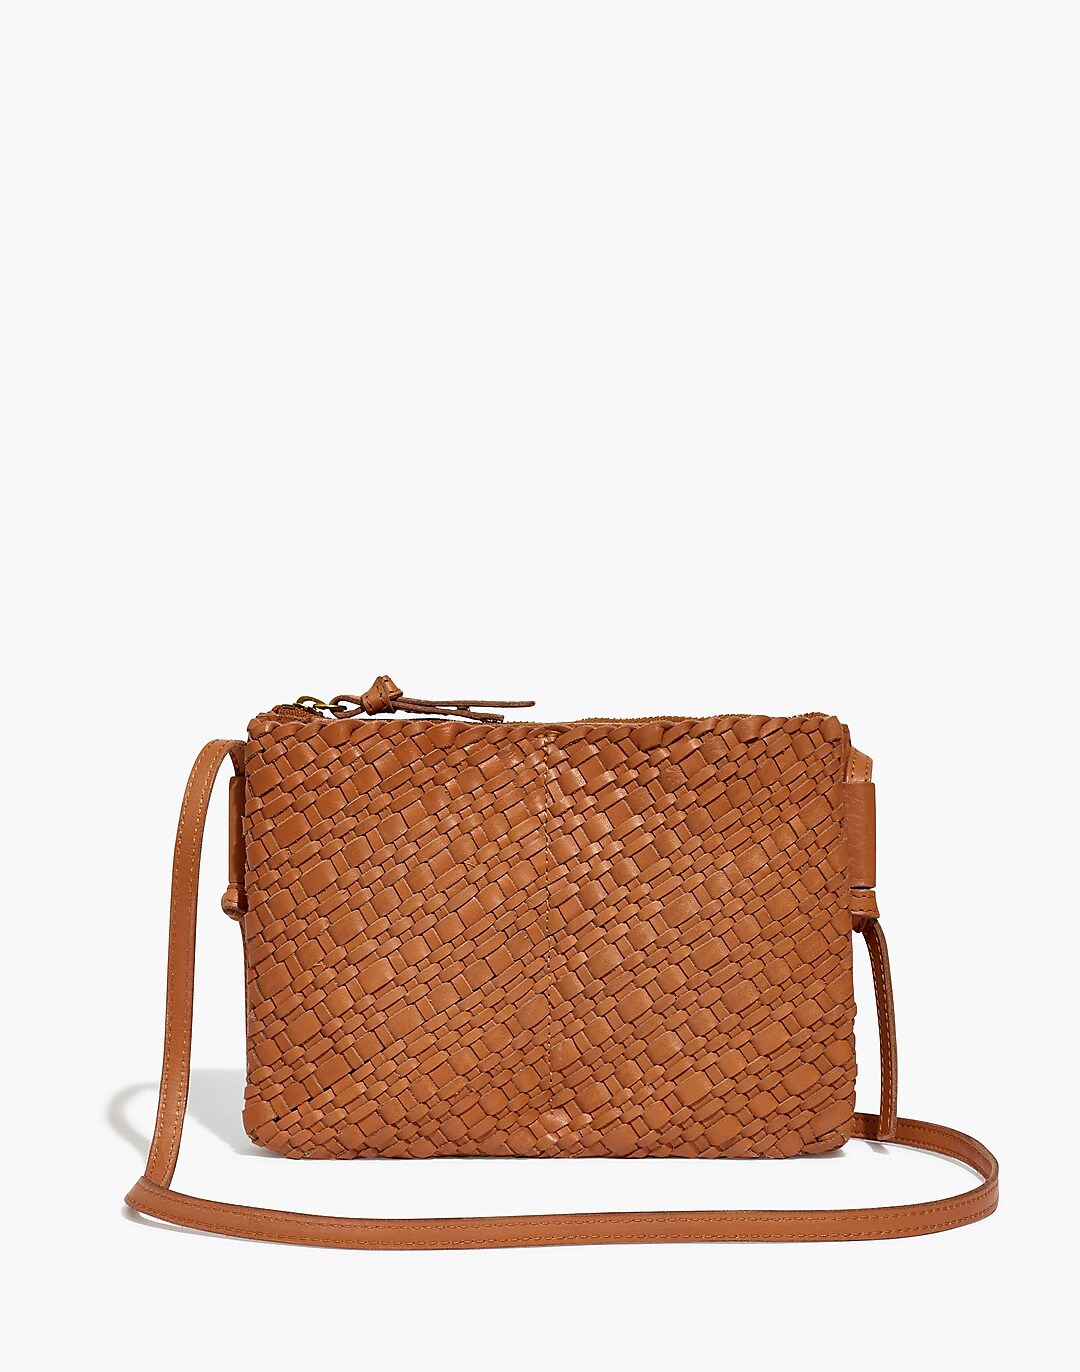 Madewell The Puff Woven Crossbody Bag in Brown